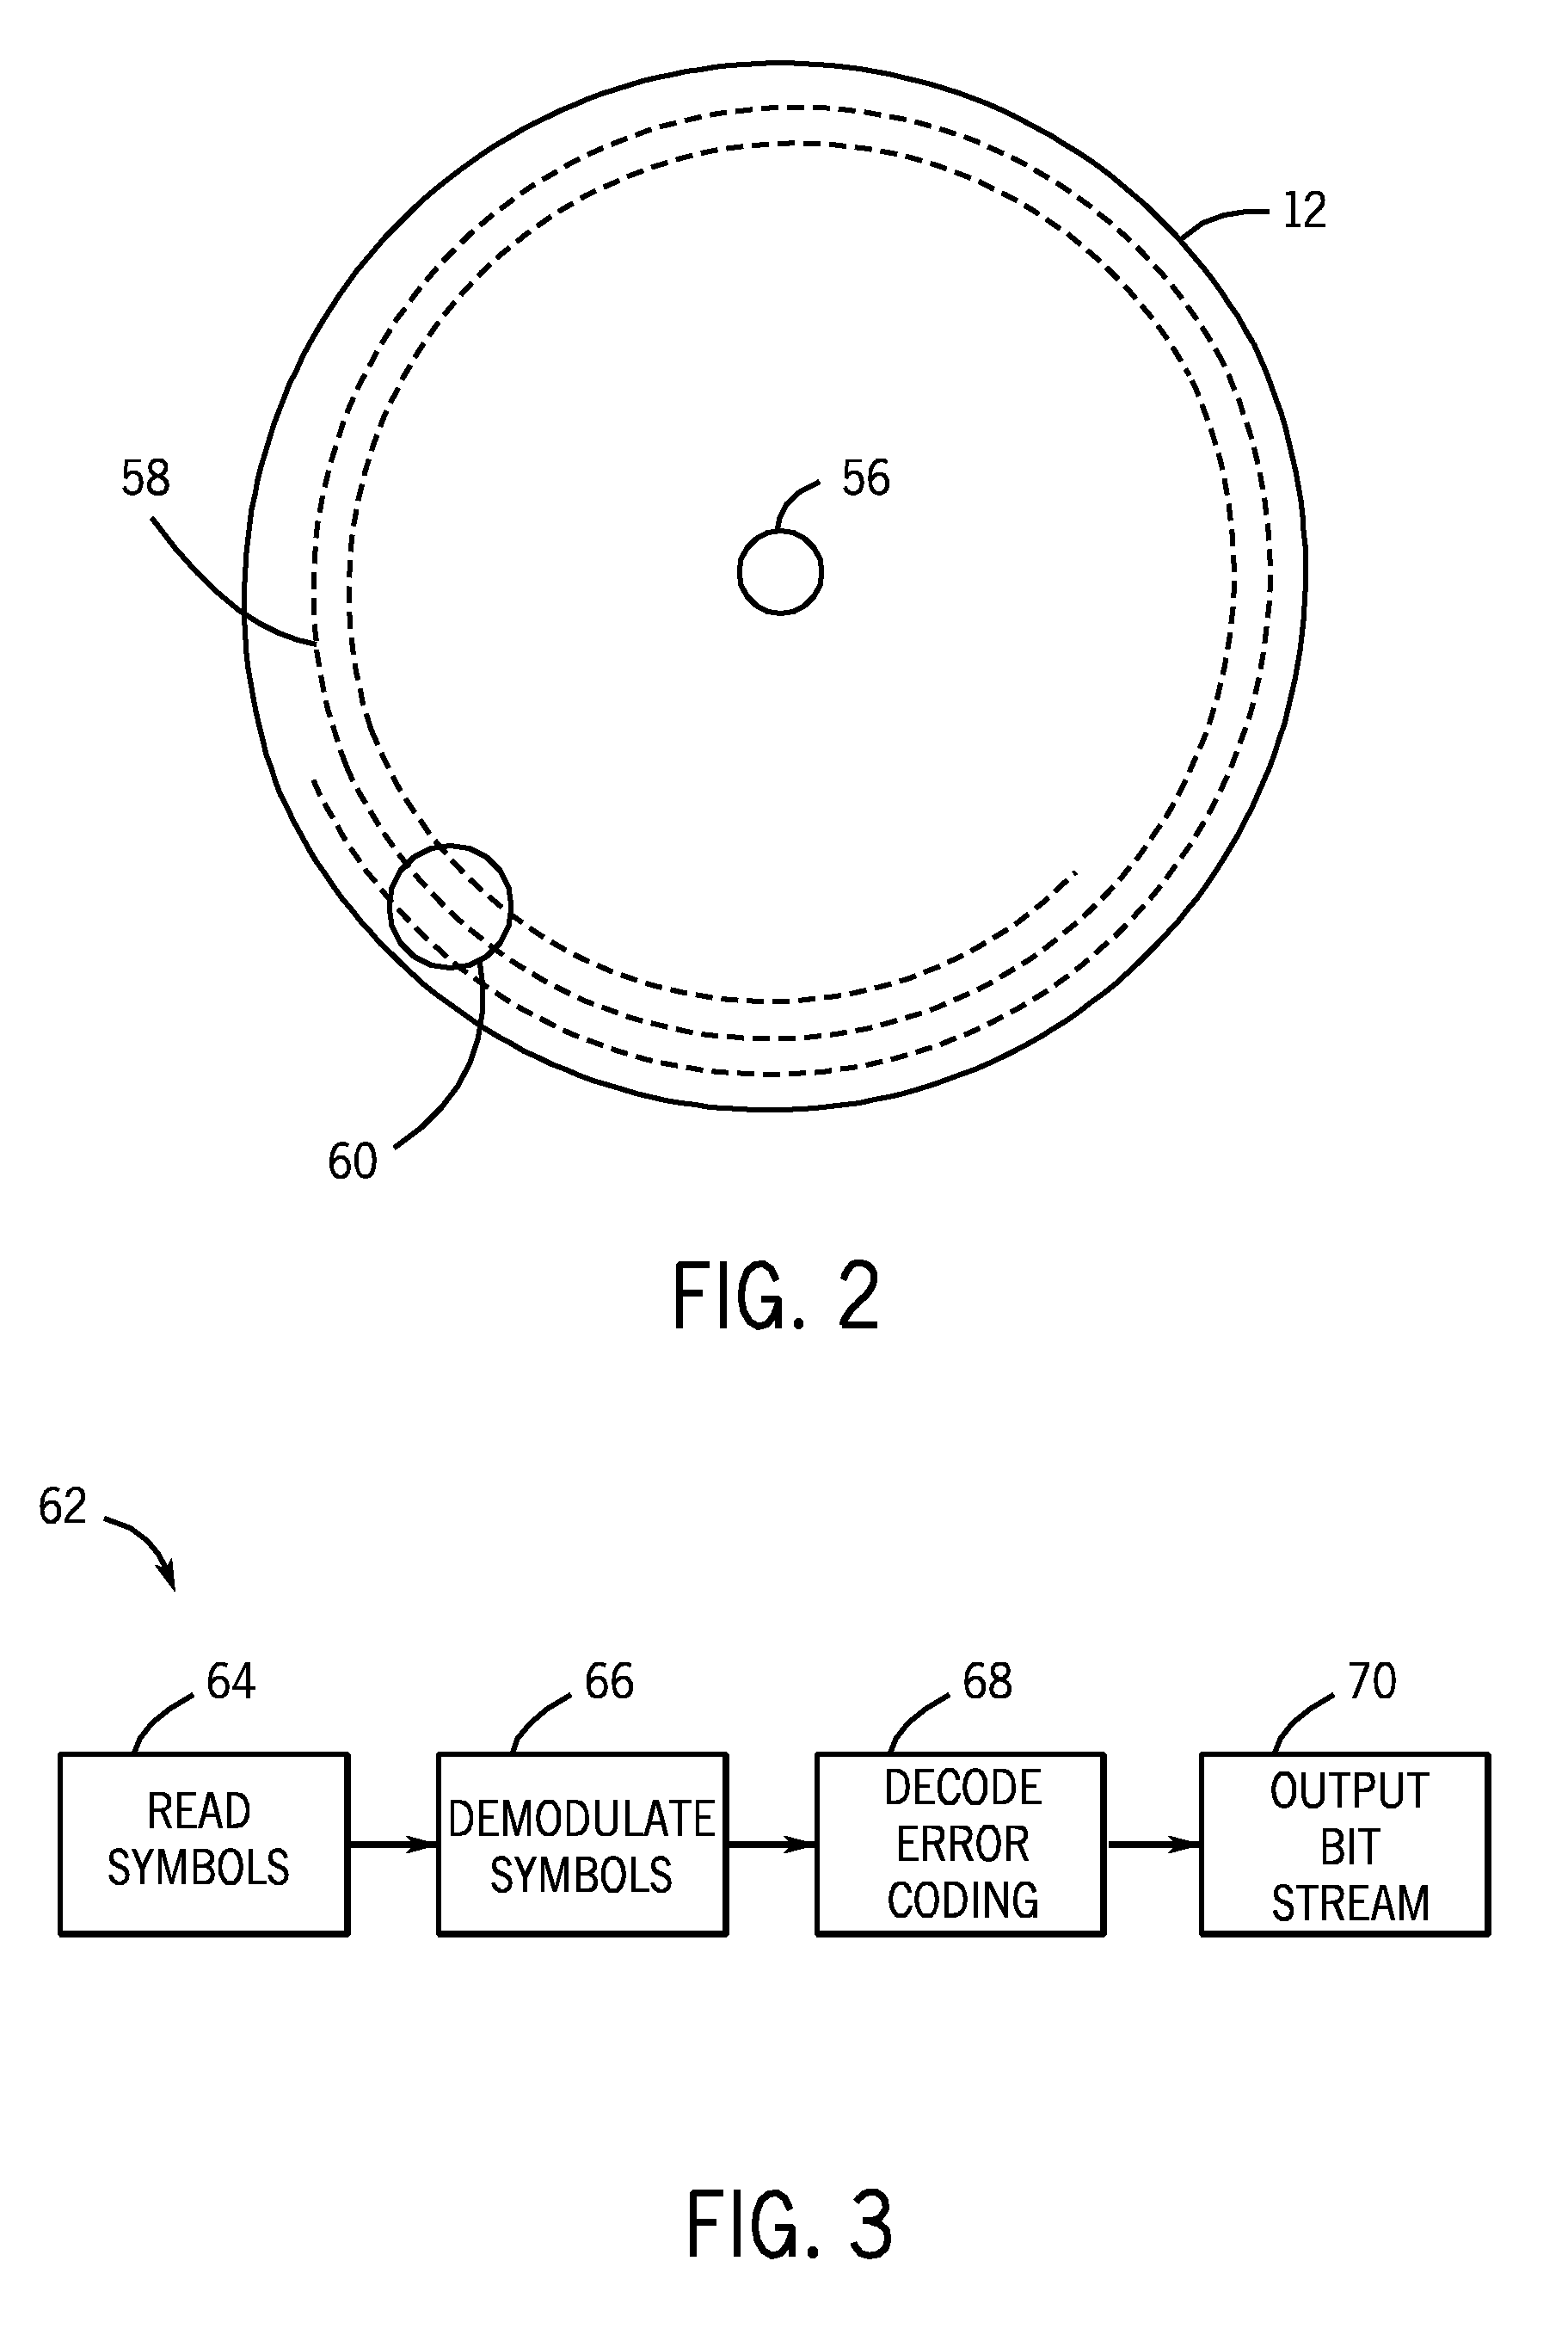 Method for formatting and reading data disks